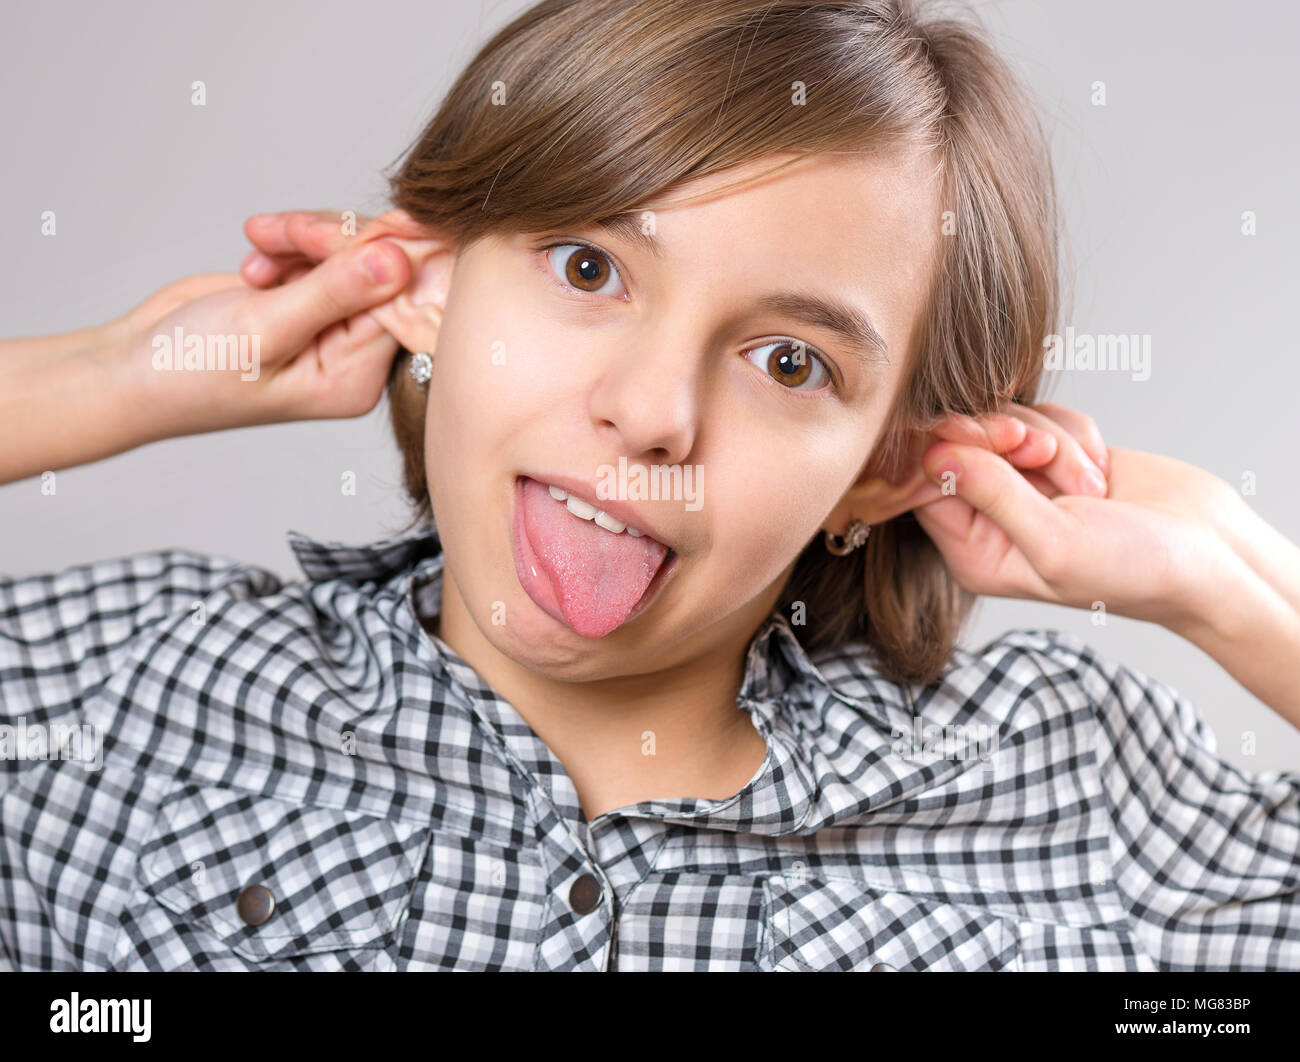 Silly girl making grimace - funny monkey face. Child with big ears, on gray background. Emotional portrait of caucasian teenager looking at camera. Stock Photo